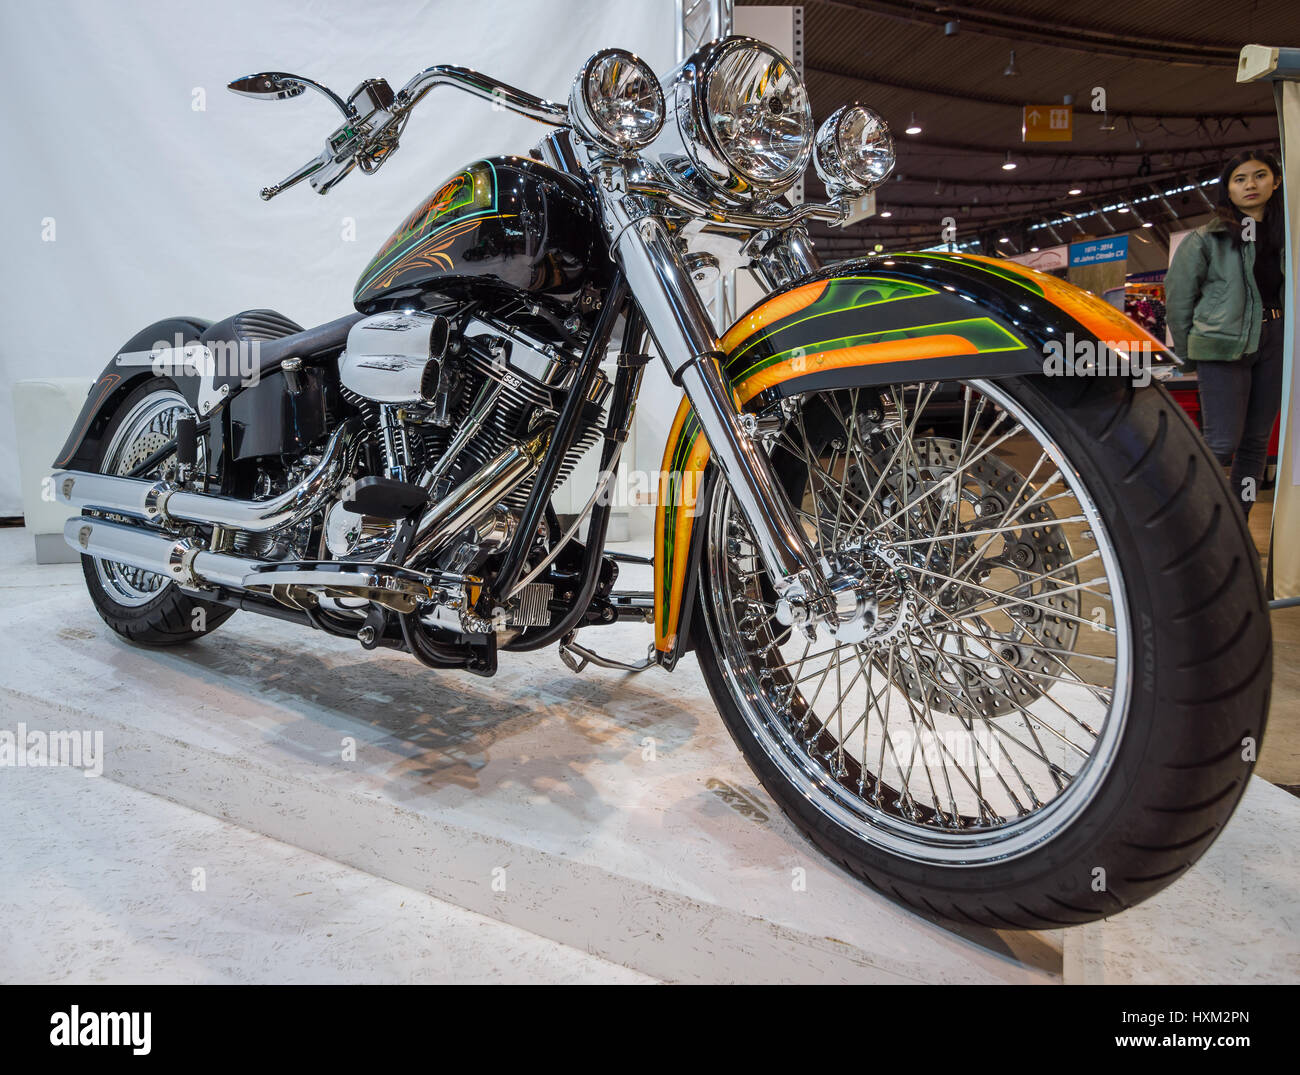 STUTTGART, GERMANY - MARCH 02, 2017: Classic motorcycle Harley-Davidson. Europe's greatest classic car exhibition 'RETRO CLASSICS' Stock Photo